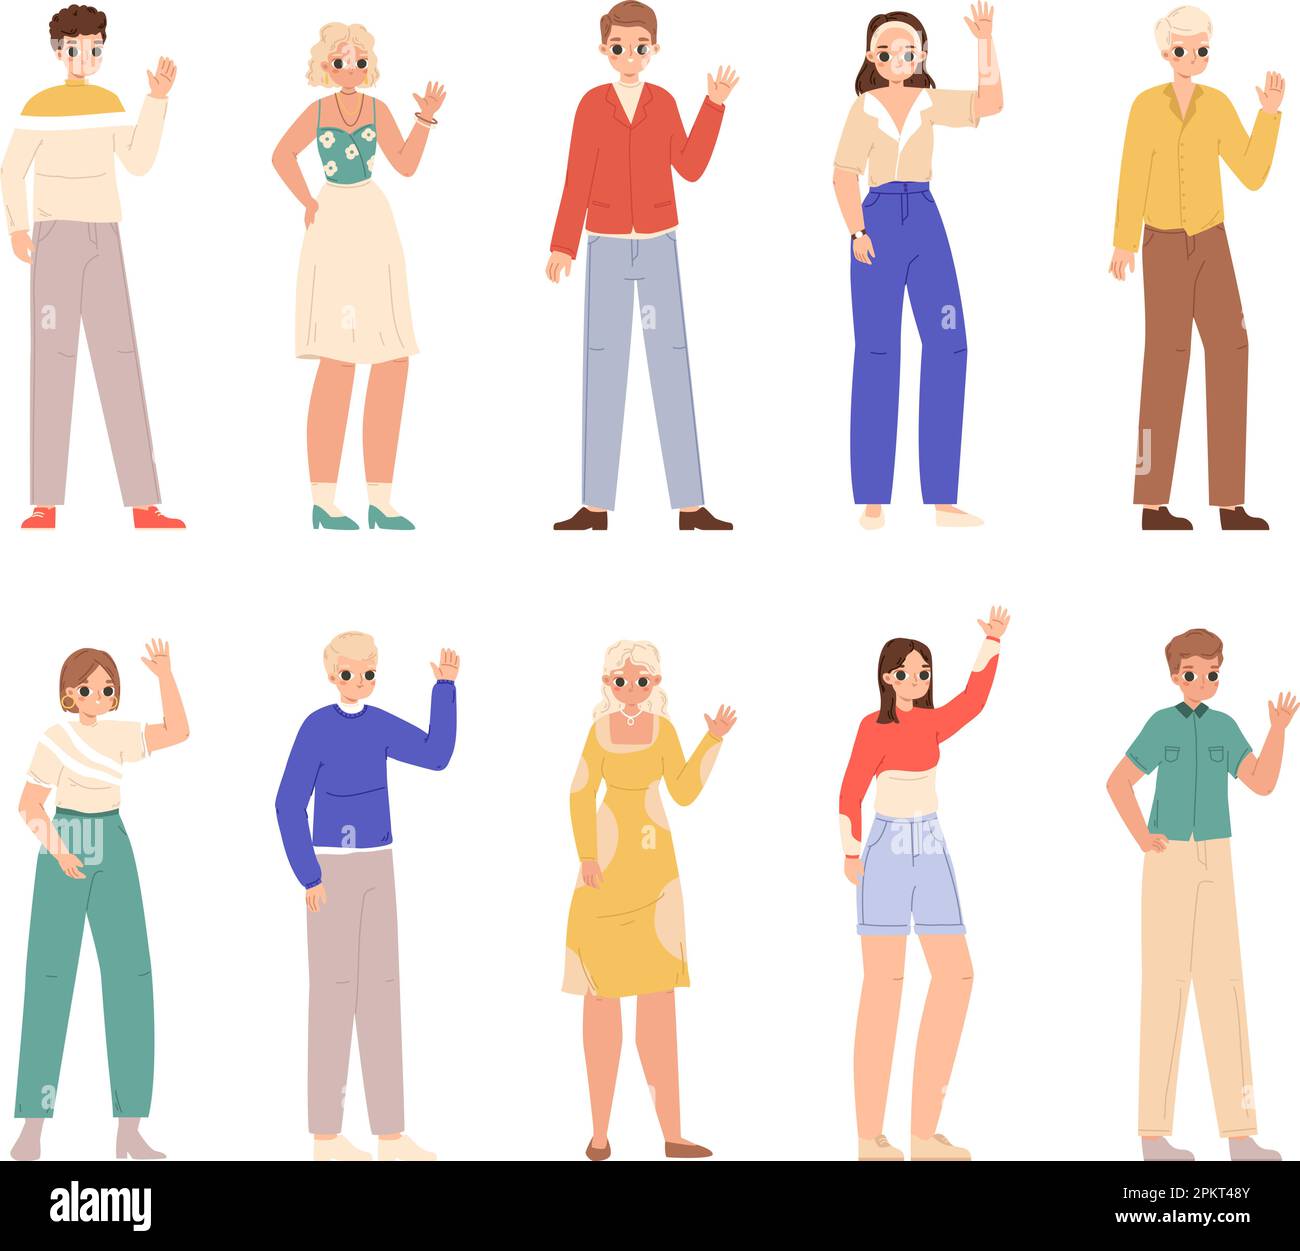 People say hello, young ethnic man woman waving. Welcoming characters, diverse adults and teens. Casual style students snugly vector community Stock Vector